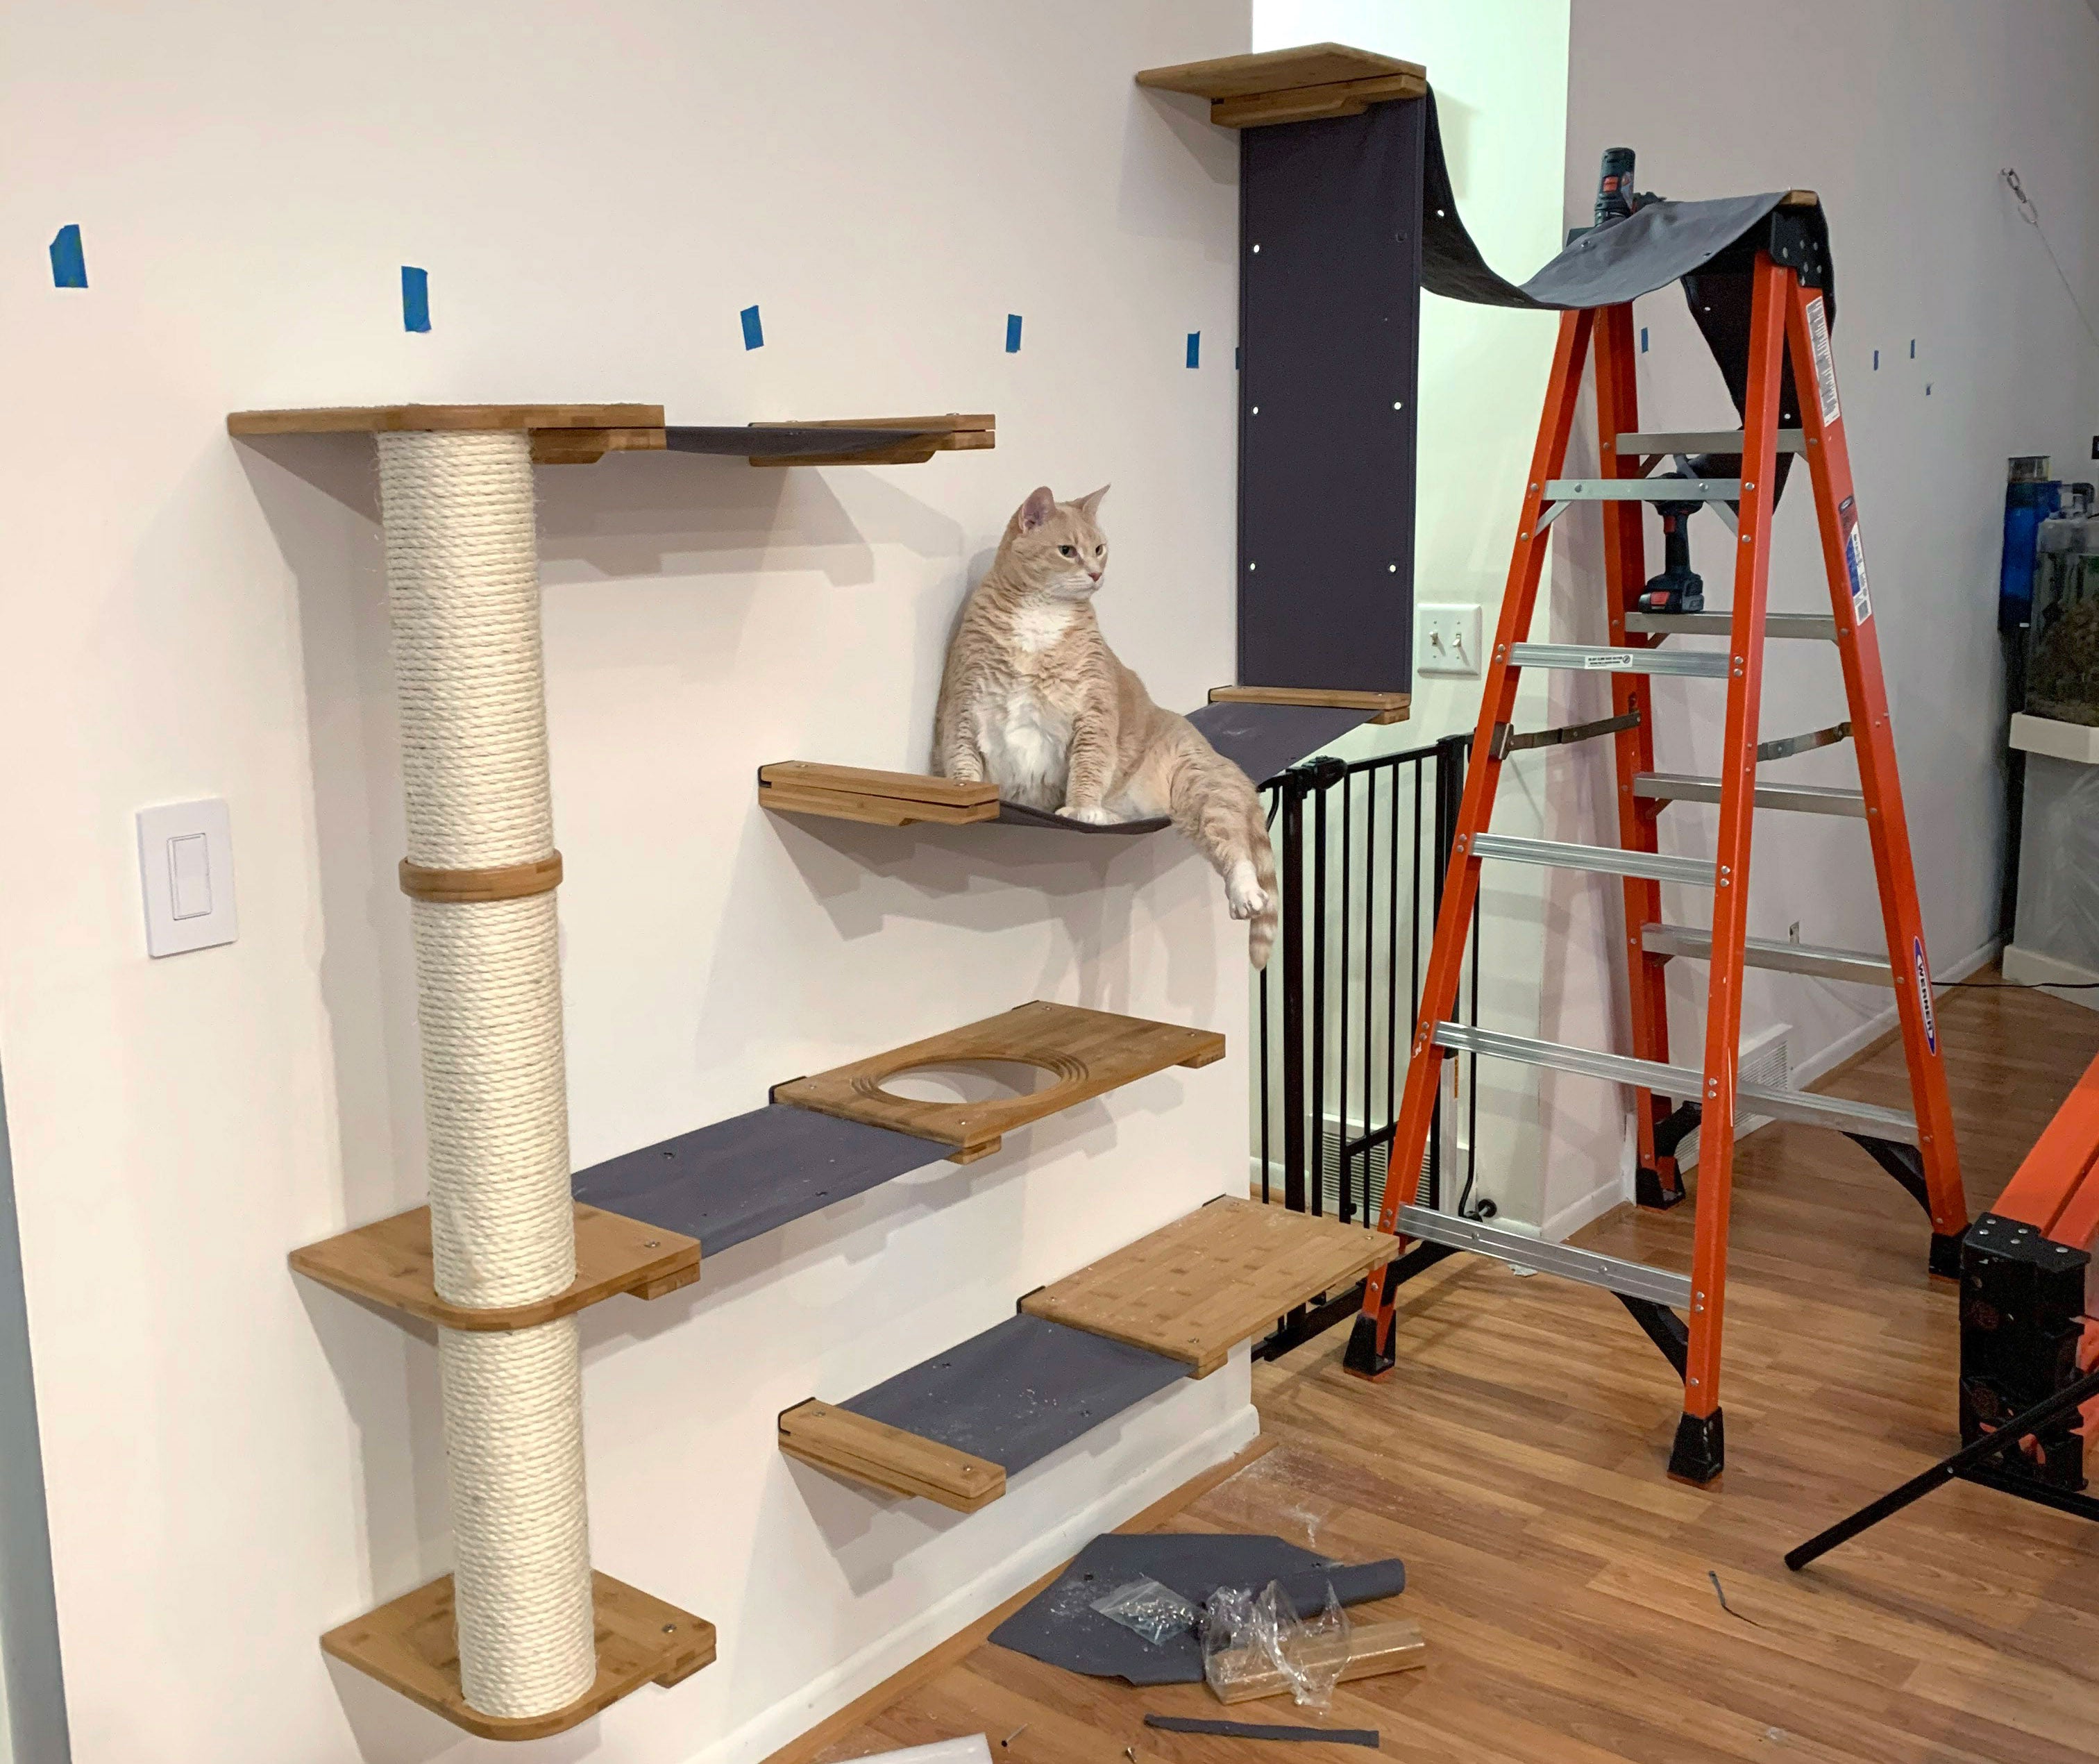 Cat enjoying the cat wall being built even before it is fully installed!